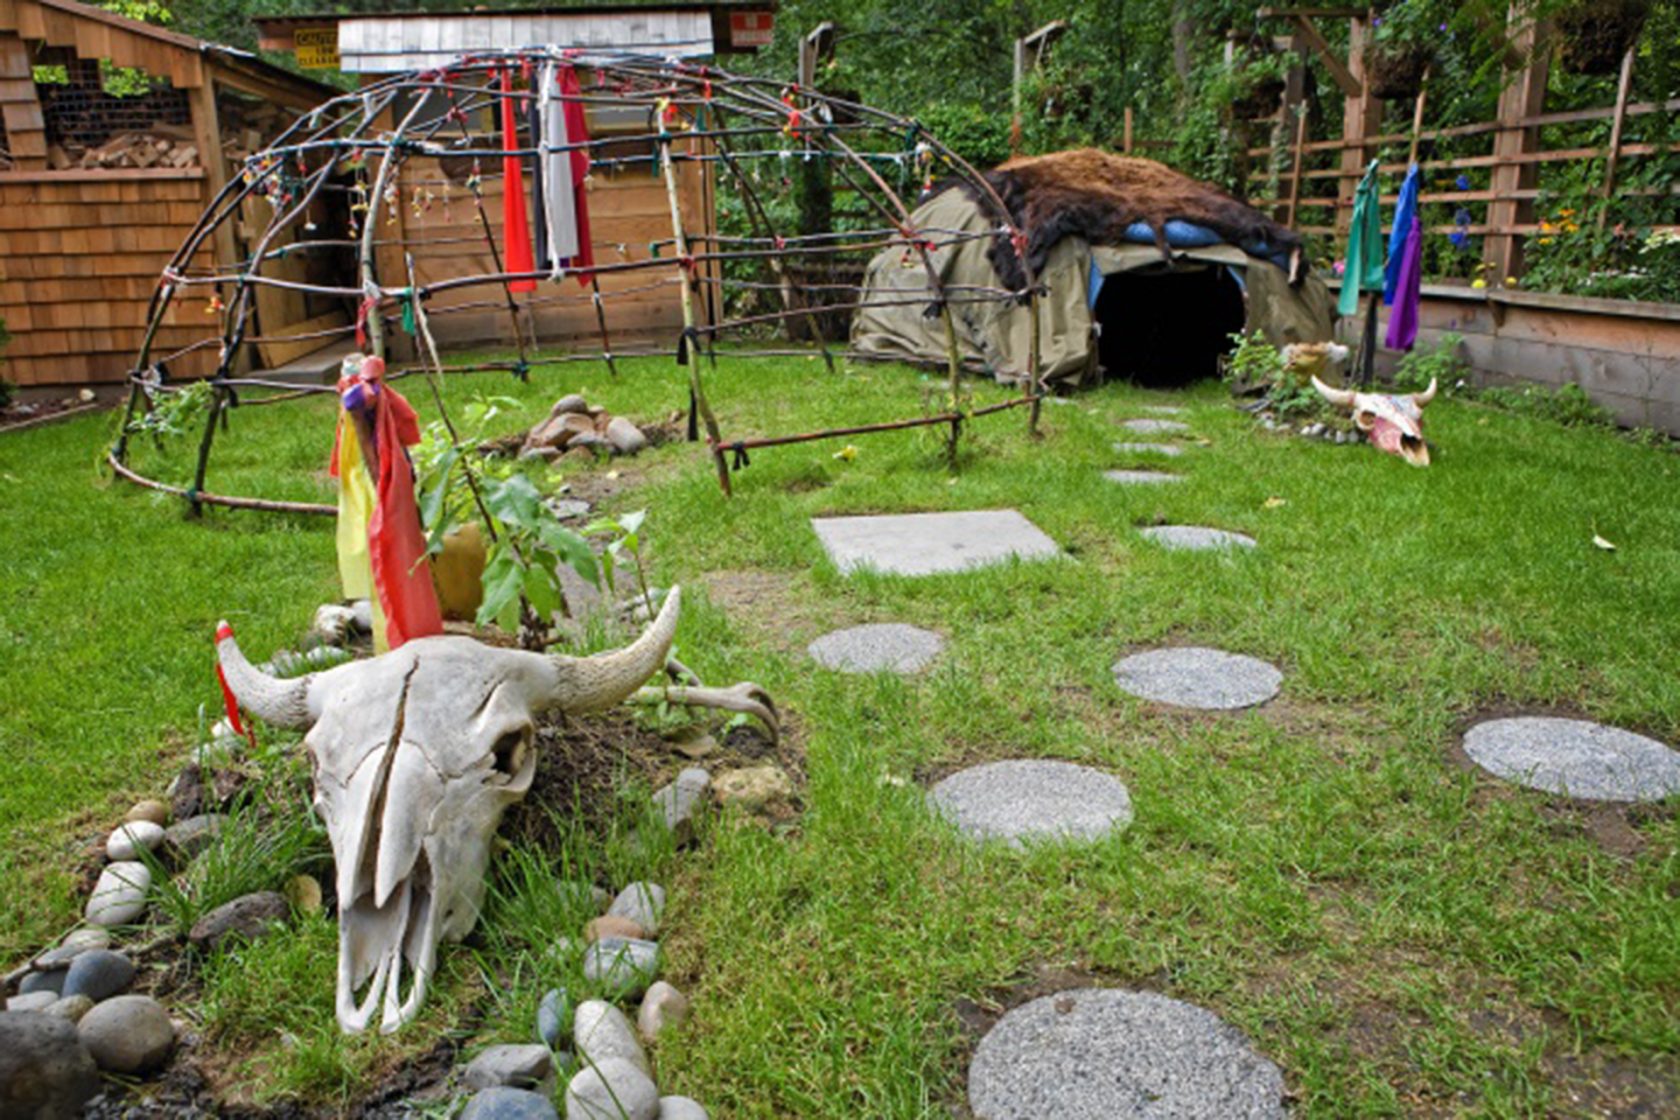 treatment centre surrey Phoenix-drug-and-alcohol-recovery-and-education-society-sweat-lodge-img